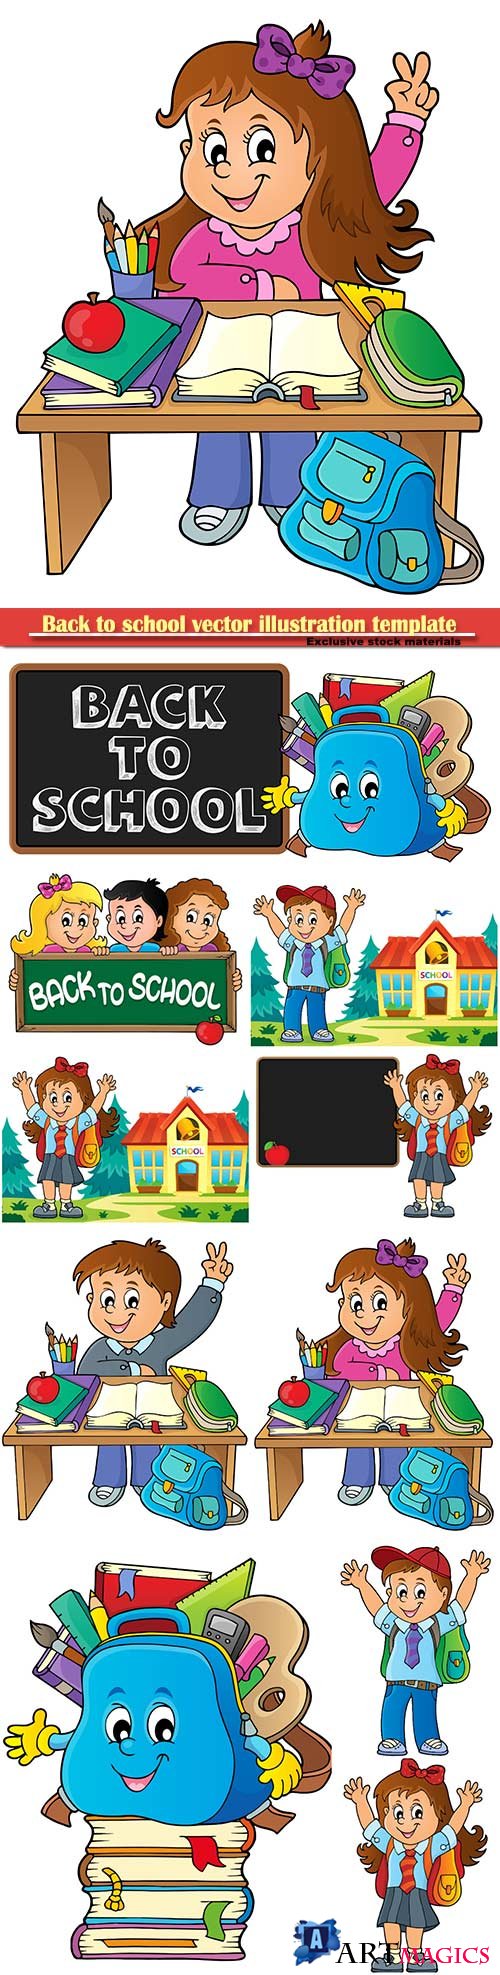 Back to school vector illustration template # 2